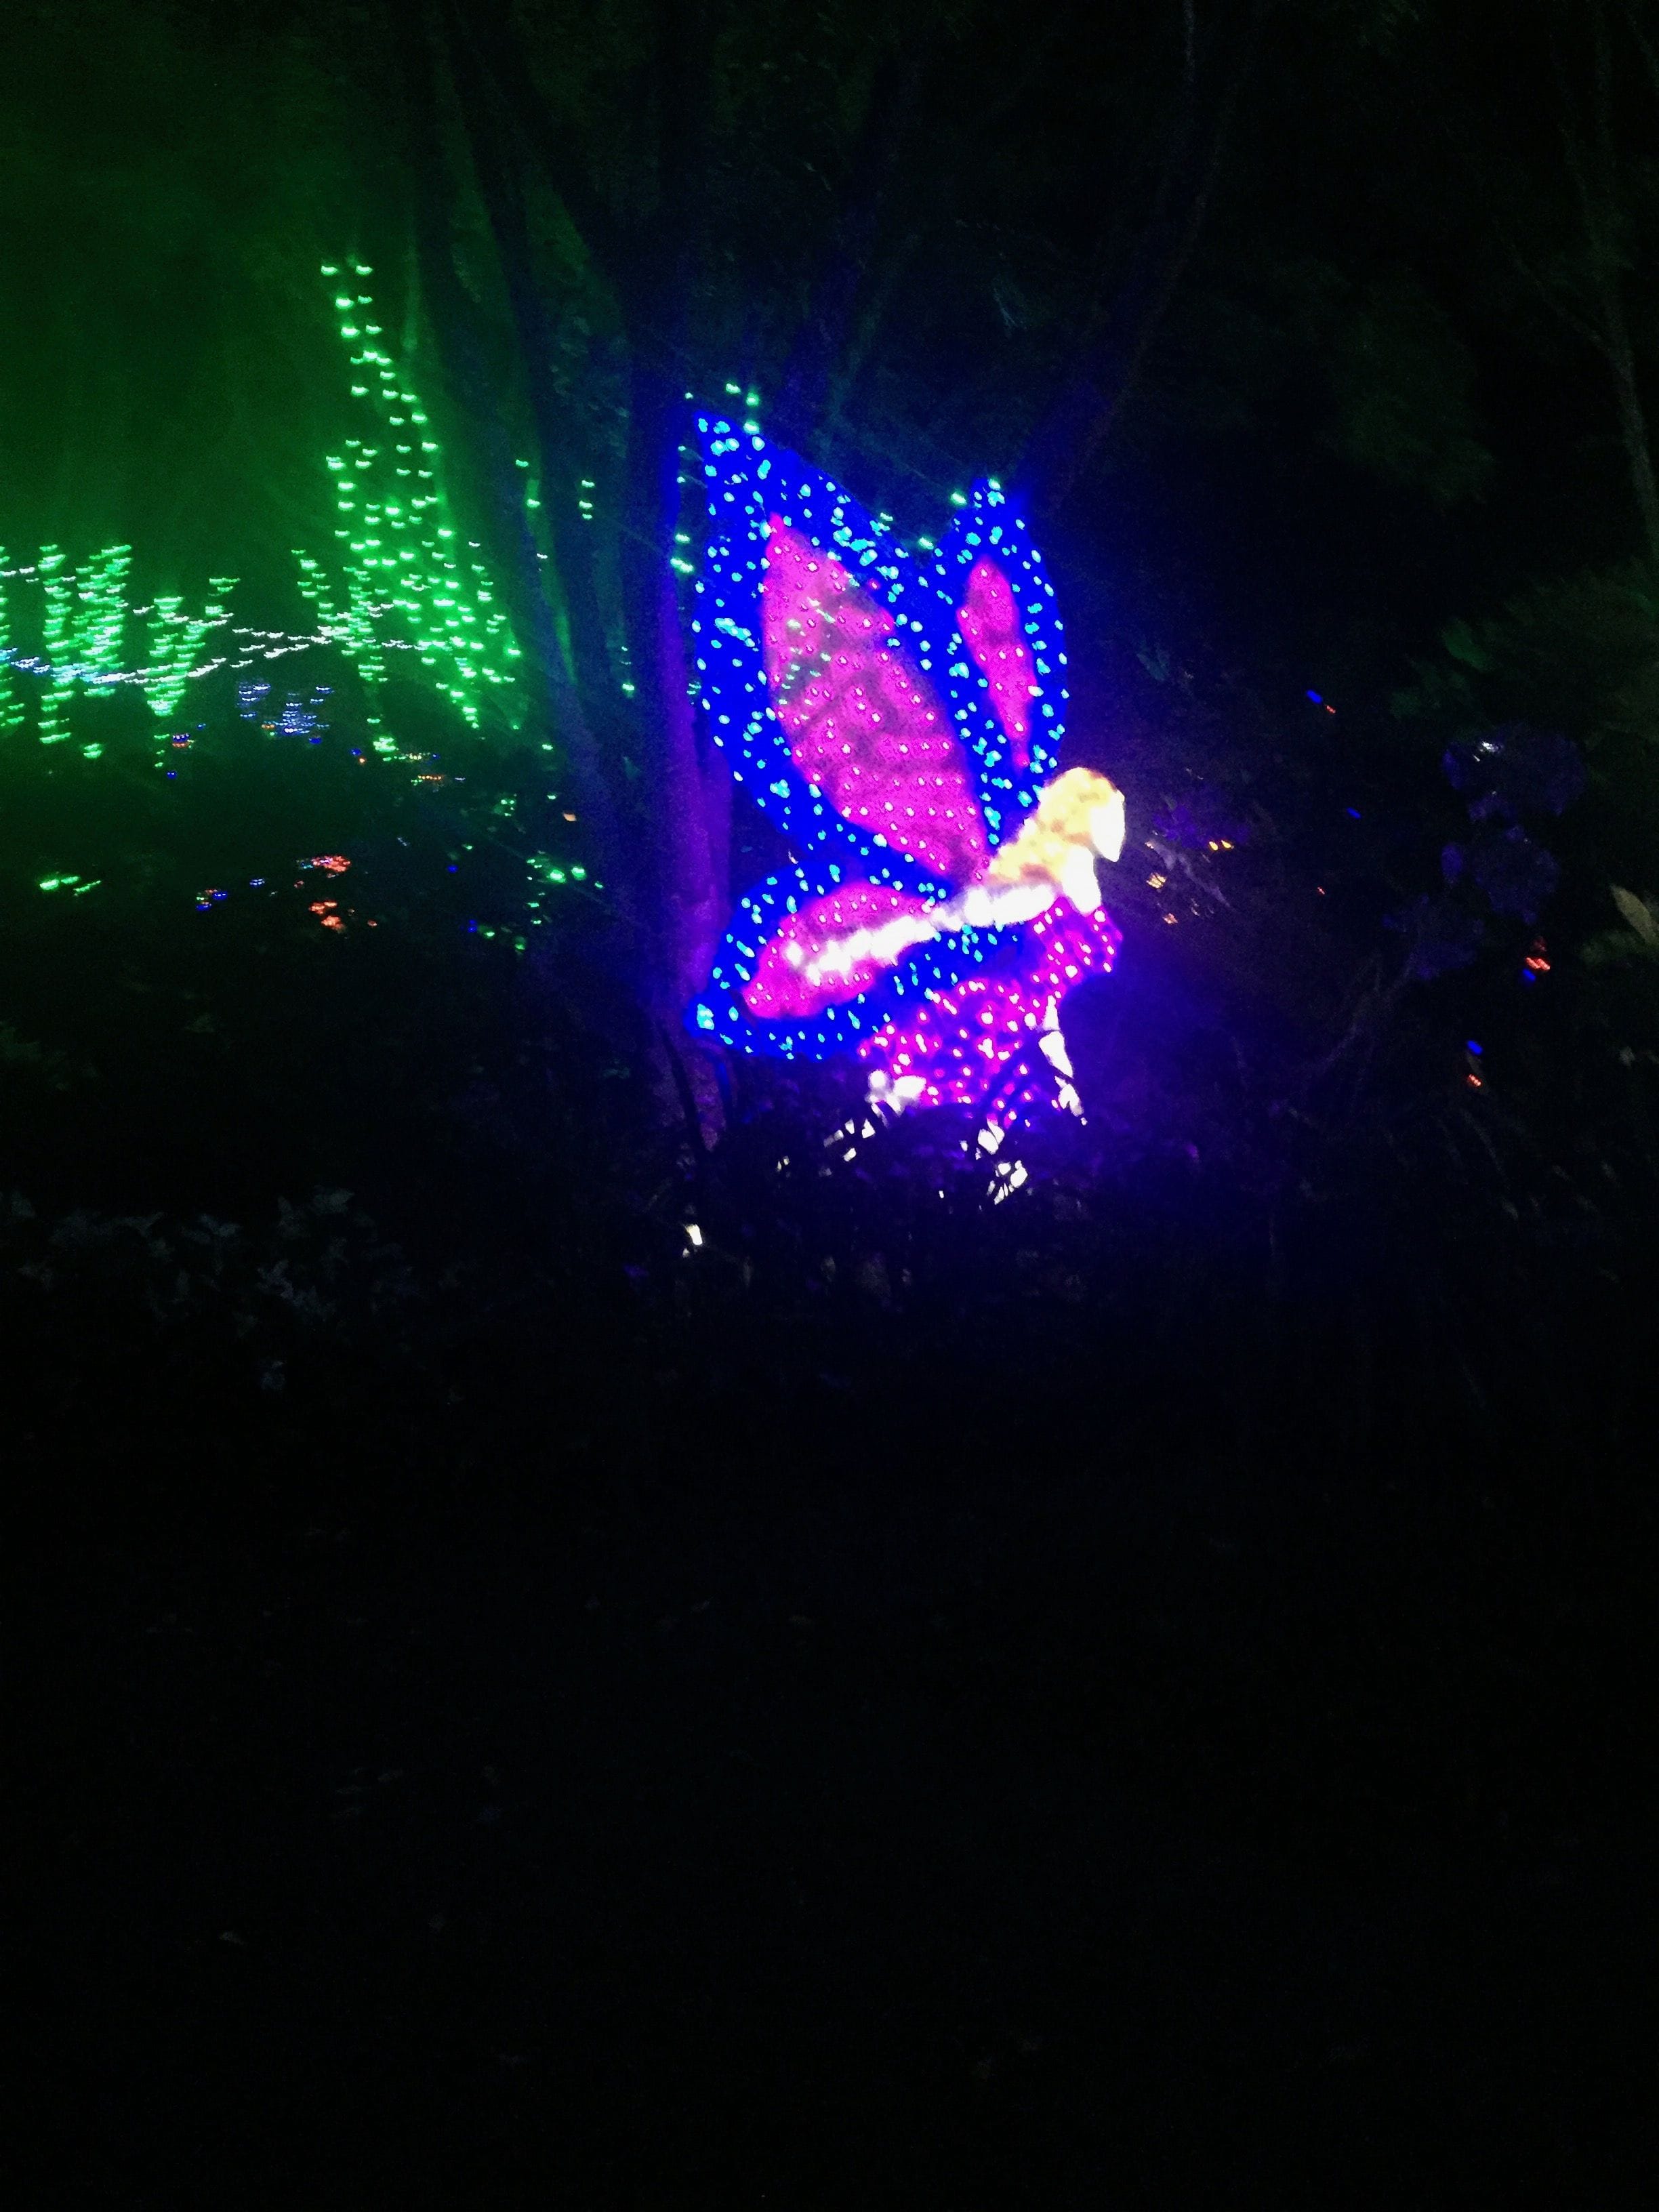 Hunter Valley Christmas Lights Spectacular Image -5b3abbe177449